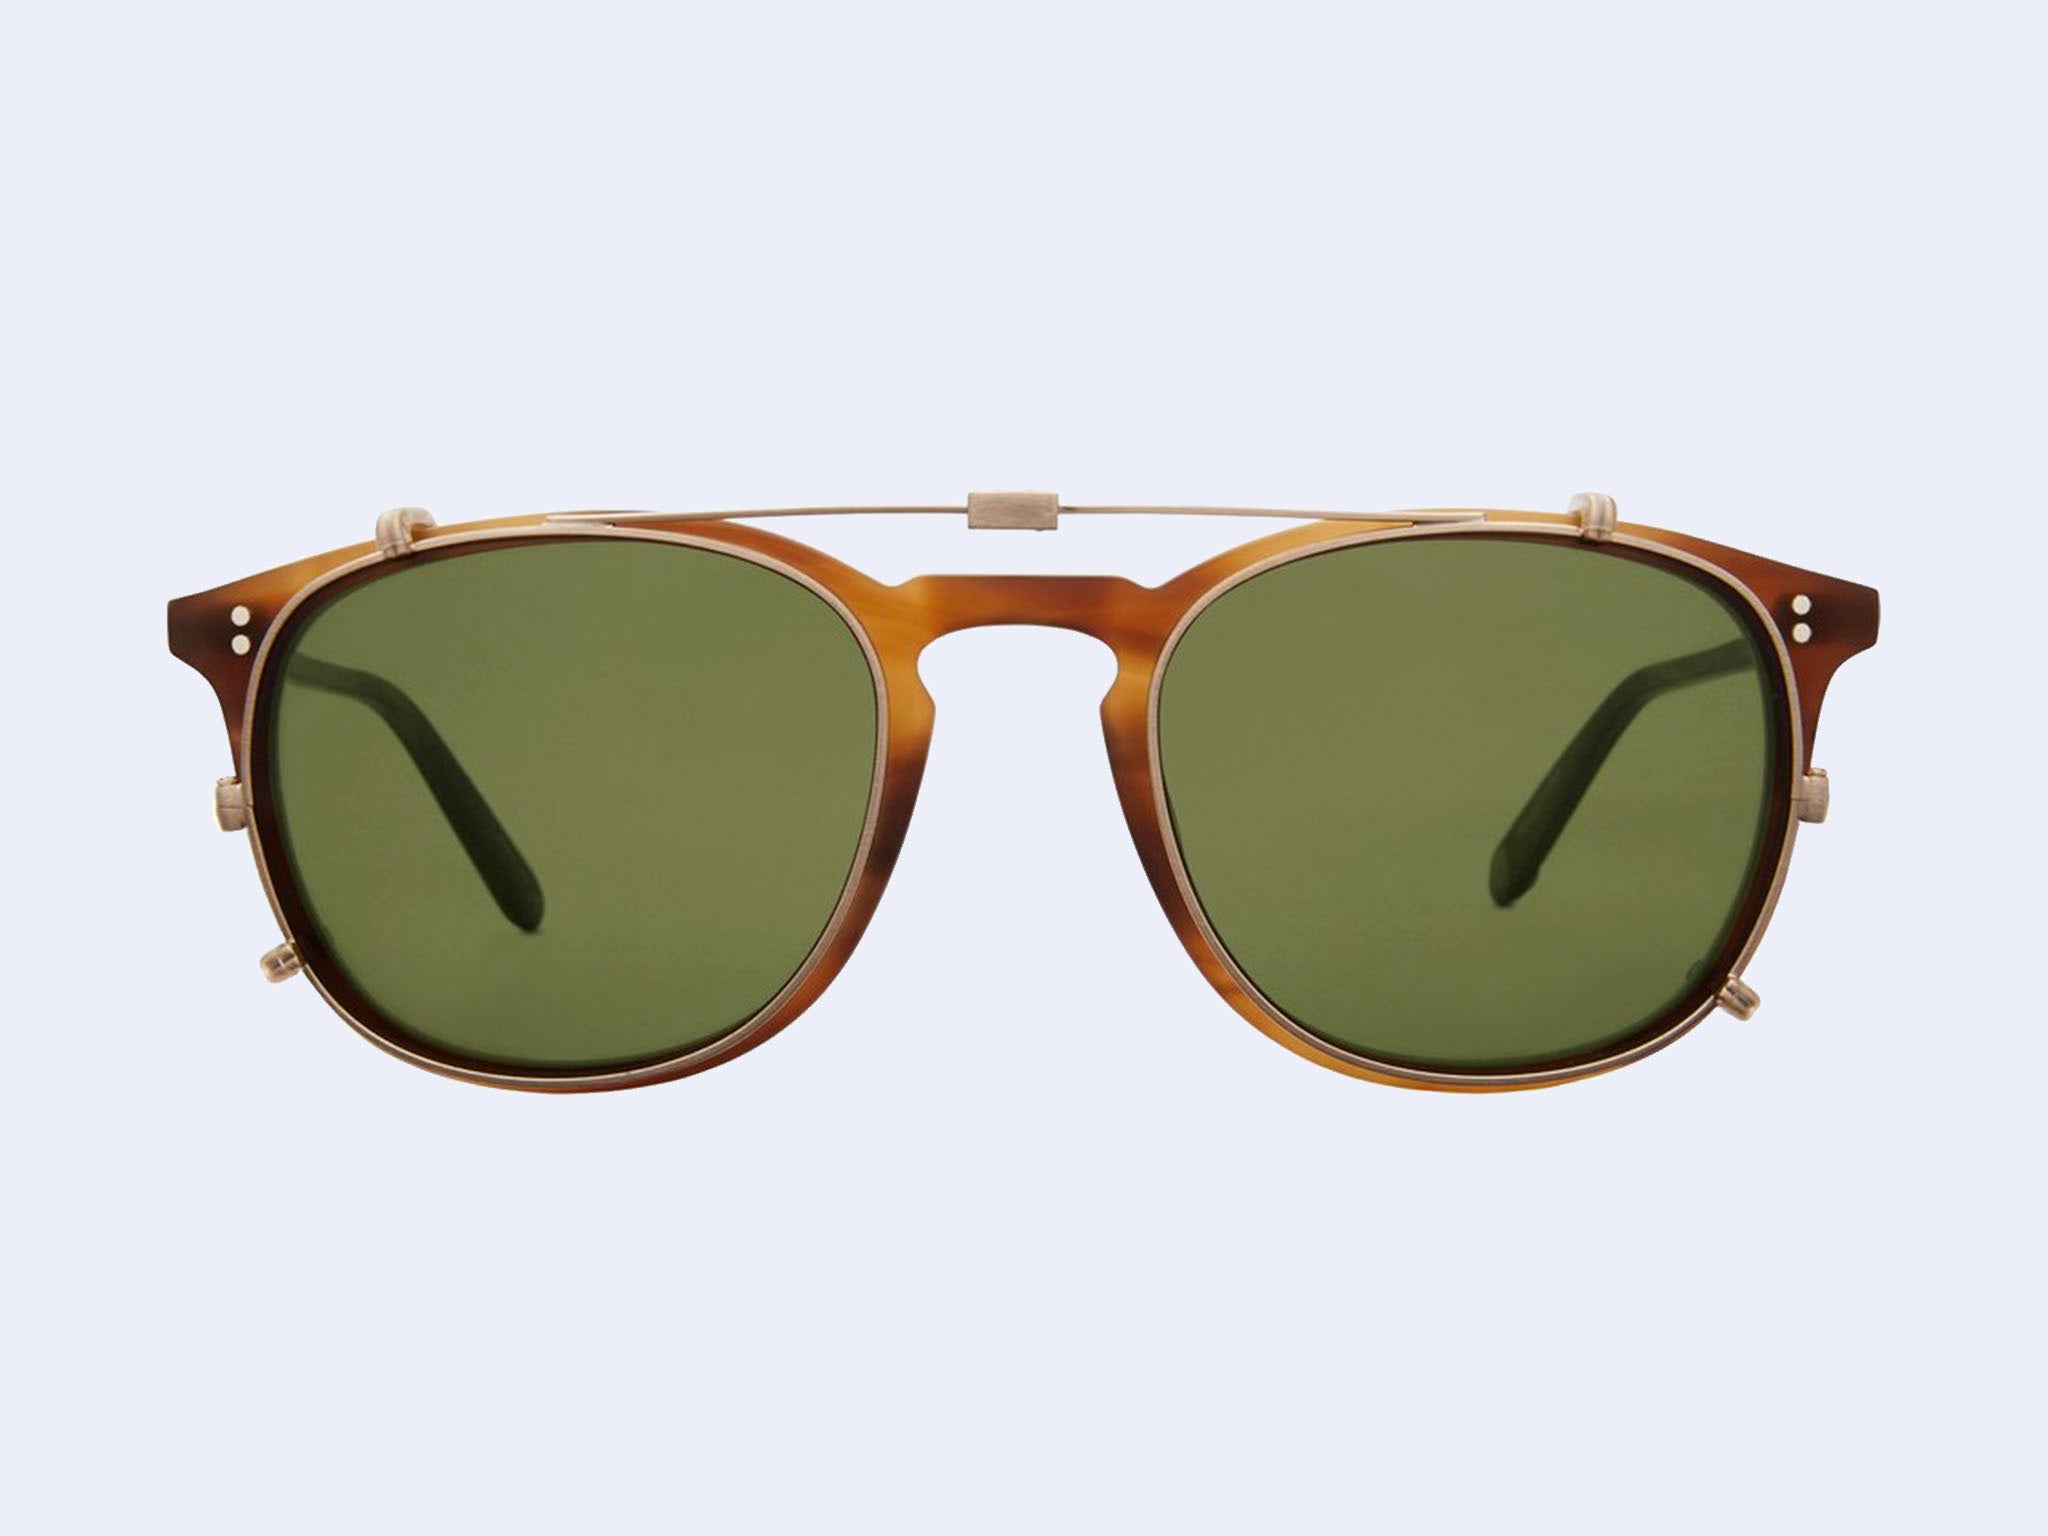 First Copy Ray-Ban 301 Green Lens Sunglasses 7AAA Quality